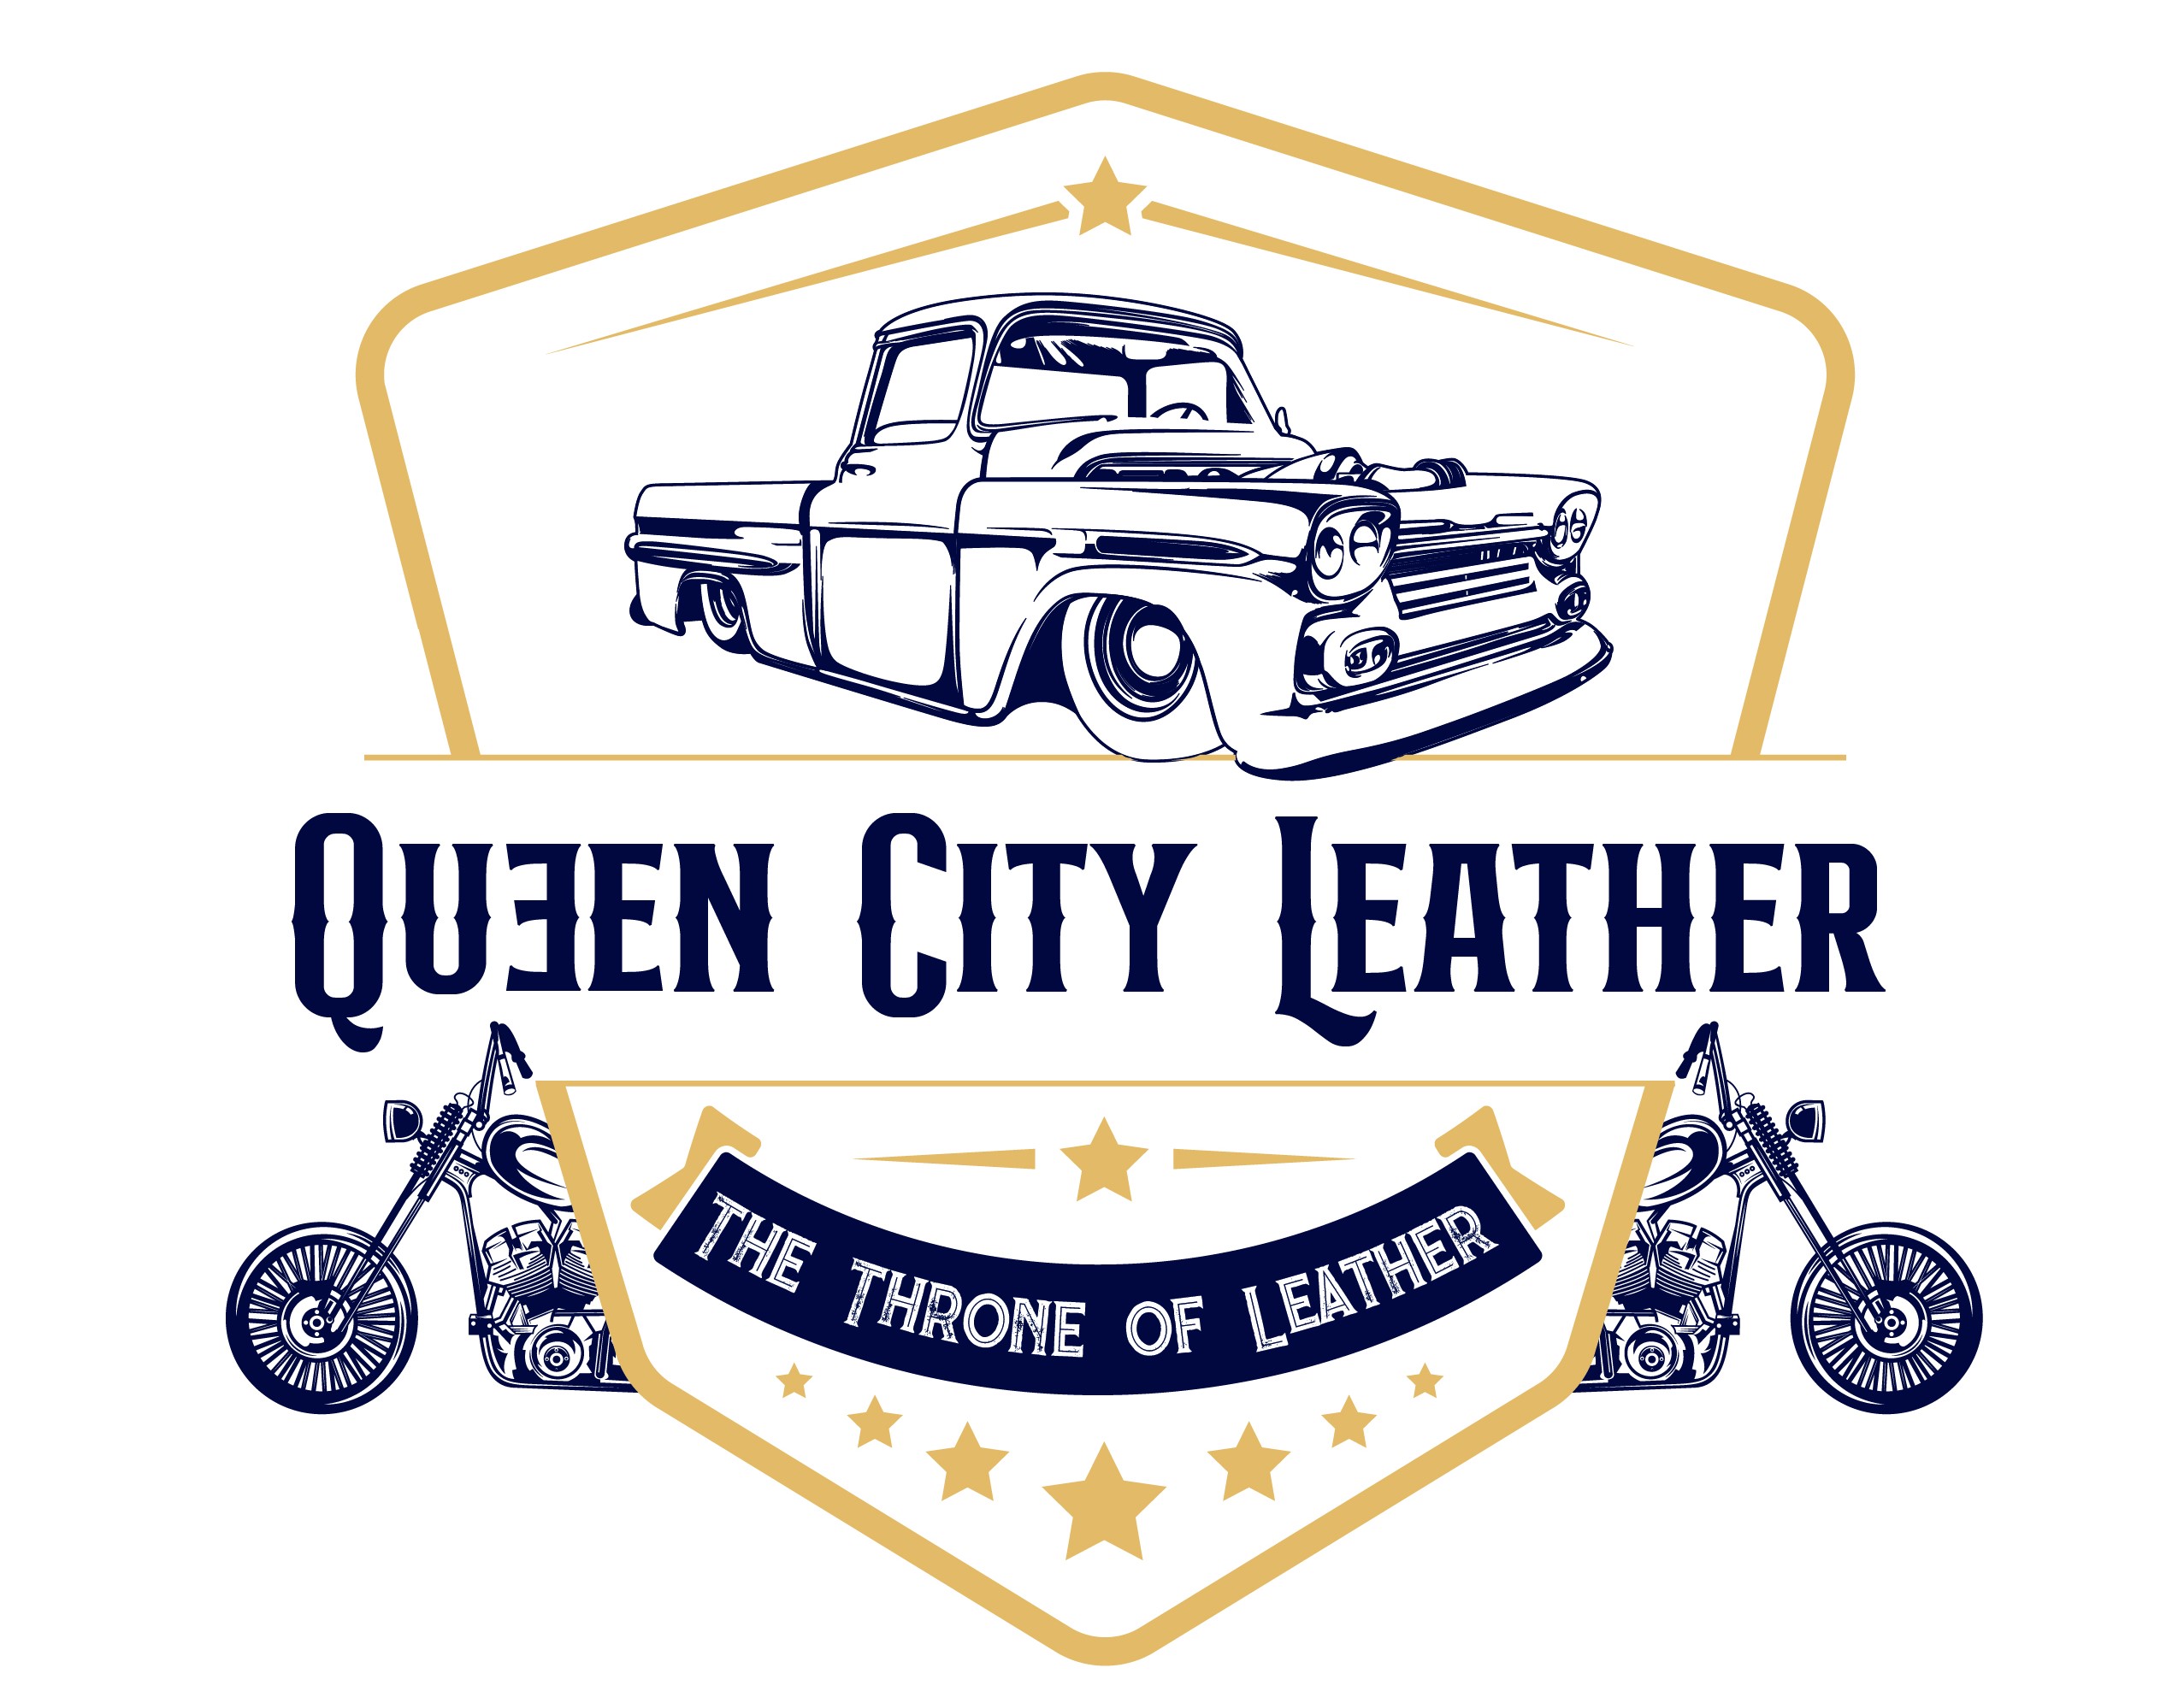 Queen City Leather